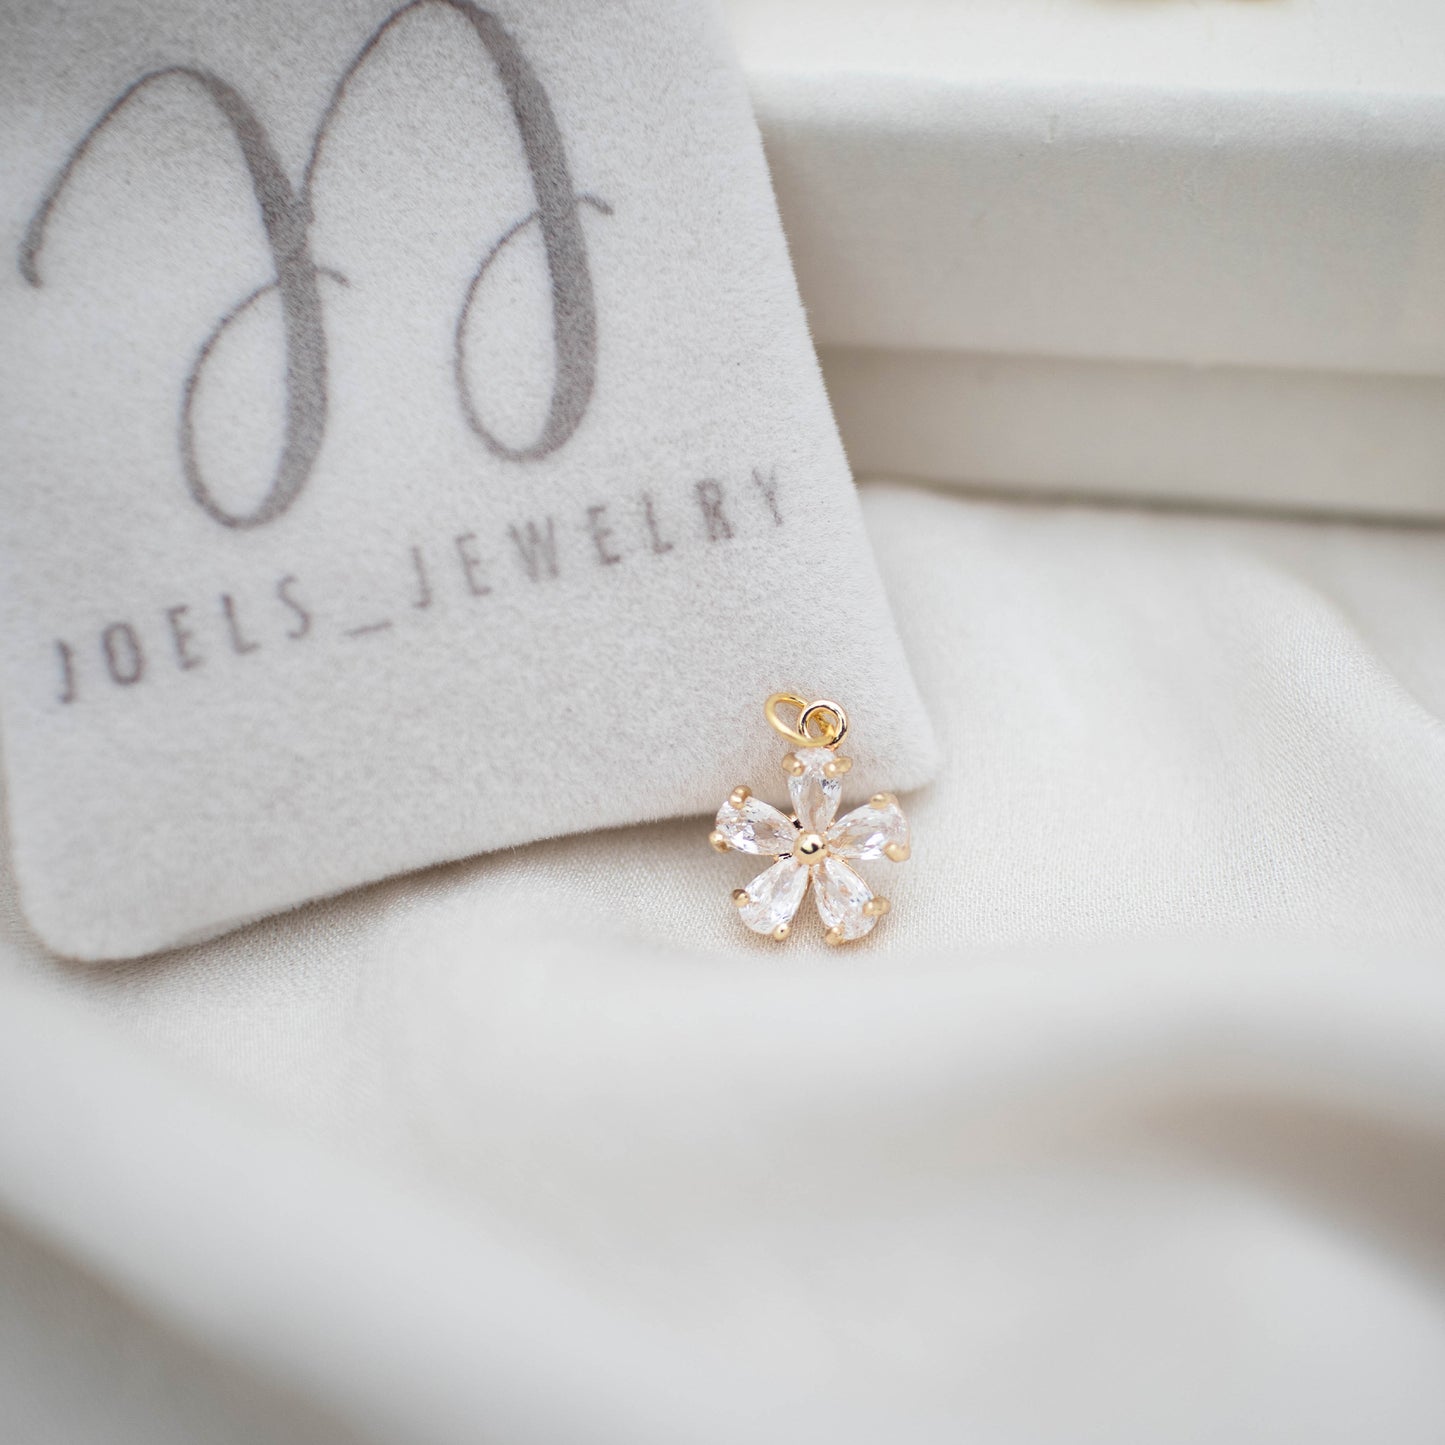 This photo features with a zircon  flower charm.